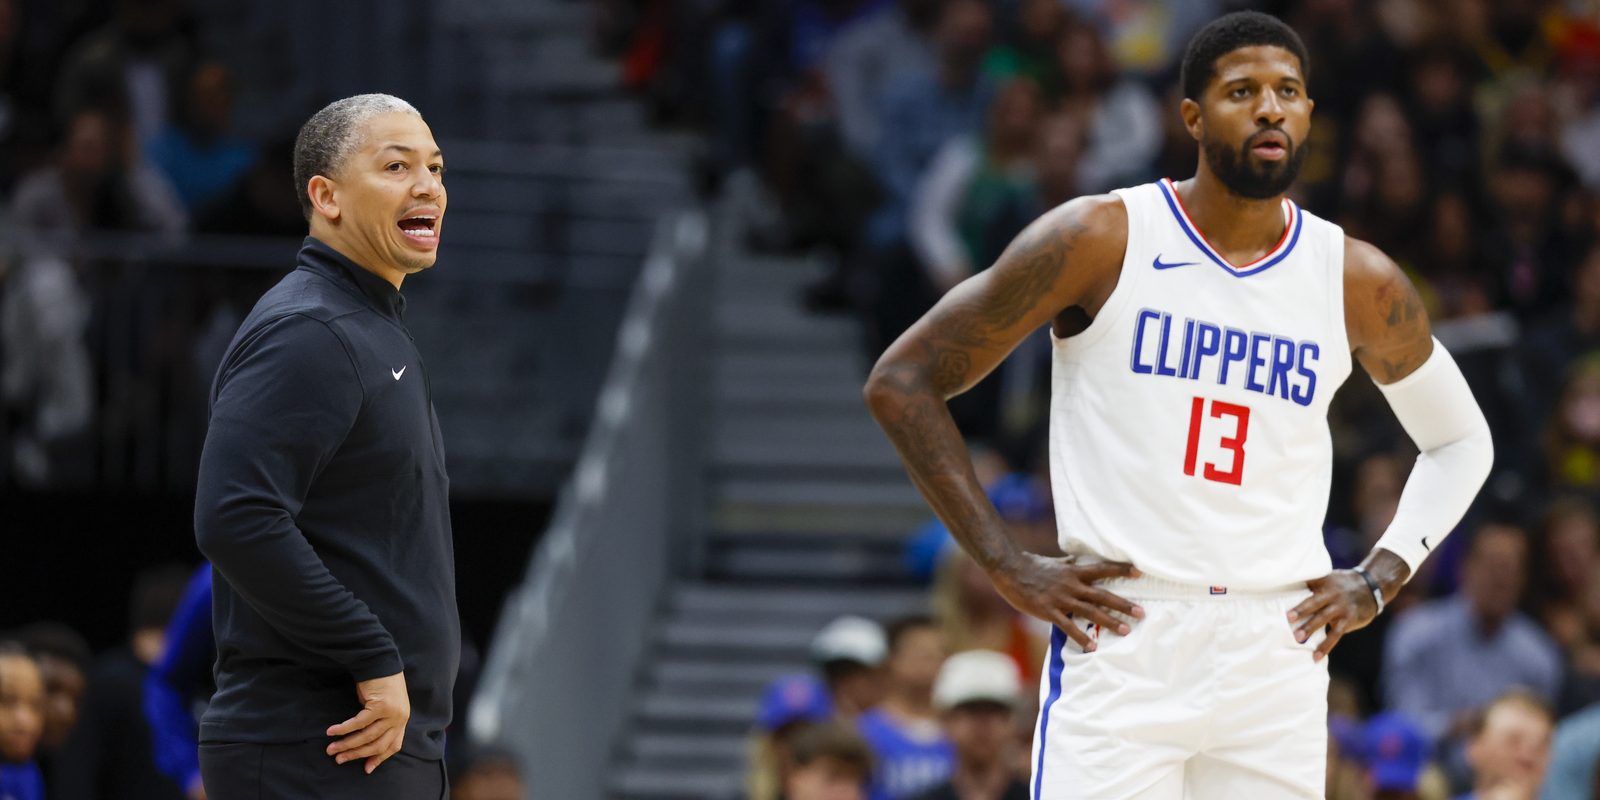 NBA coaches are skeptical of league's new stance on 'load management'